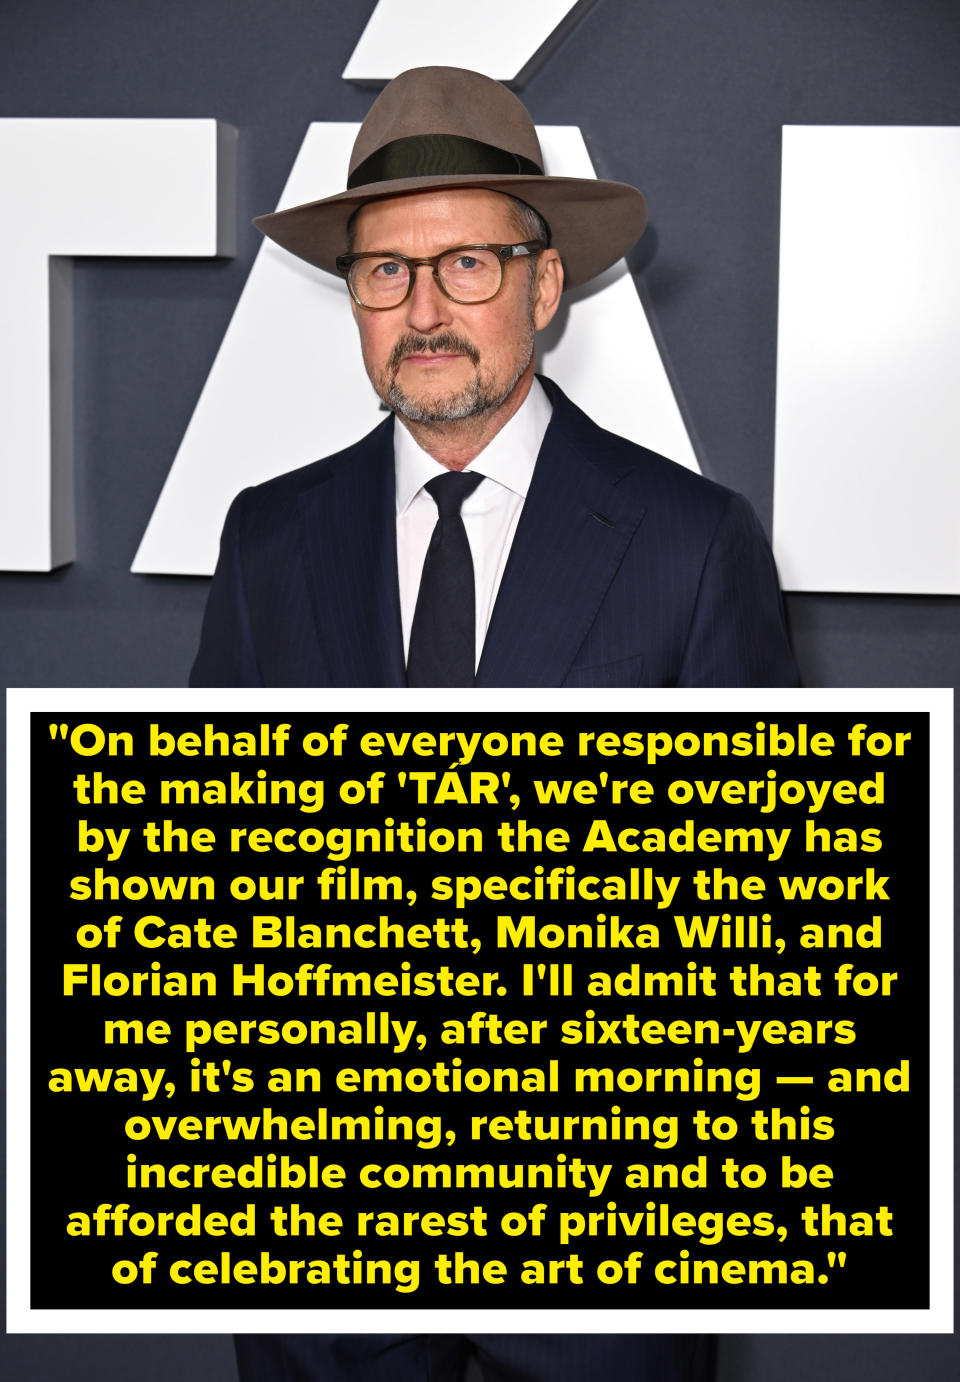 "On behalf of everyone  responsible for the making of Tár, we're overjoyed by the recognition the Academy has shown our film, specifically the work of Cate Blanchett, Monika Willi, and Florian Hoffmeister"